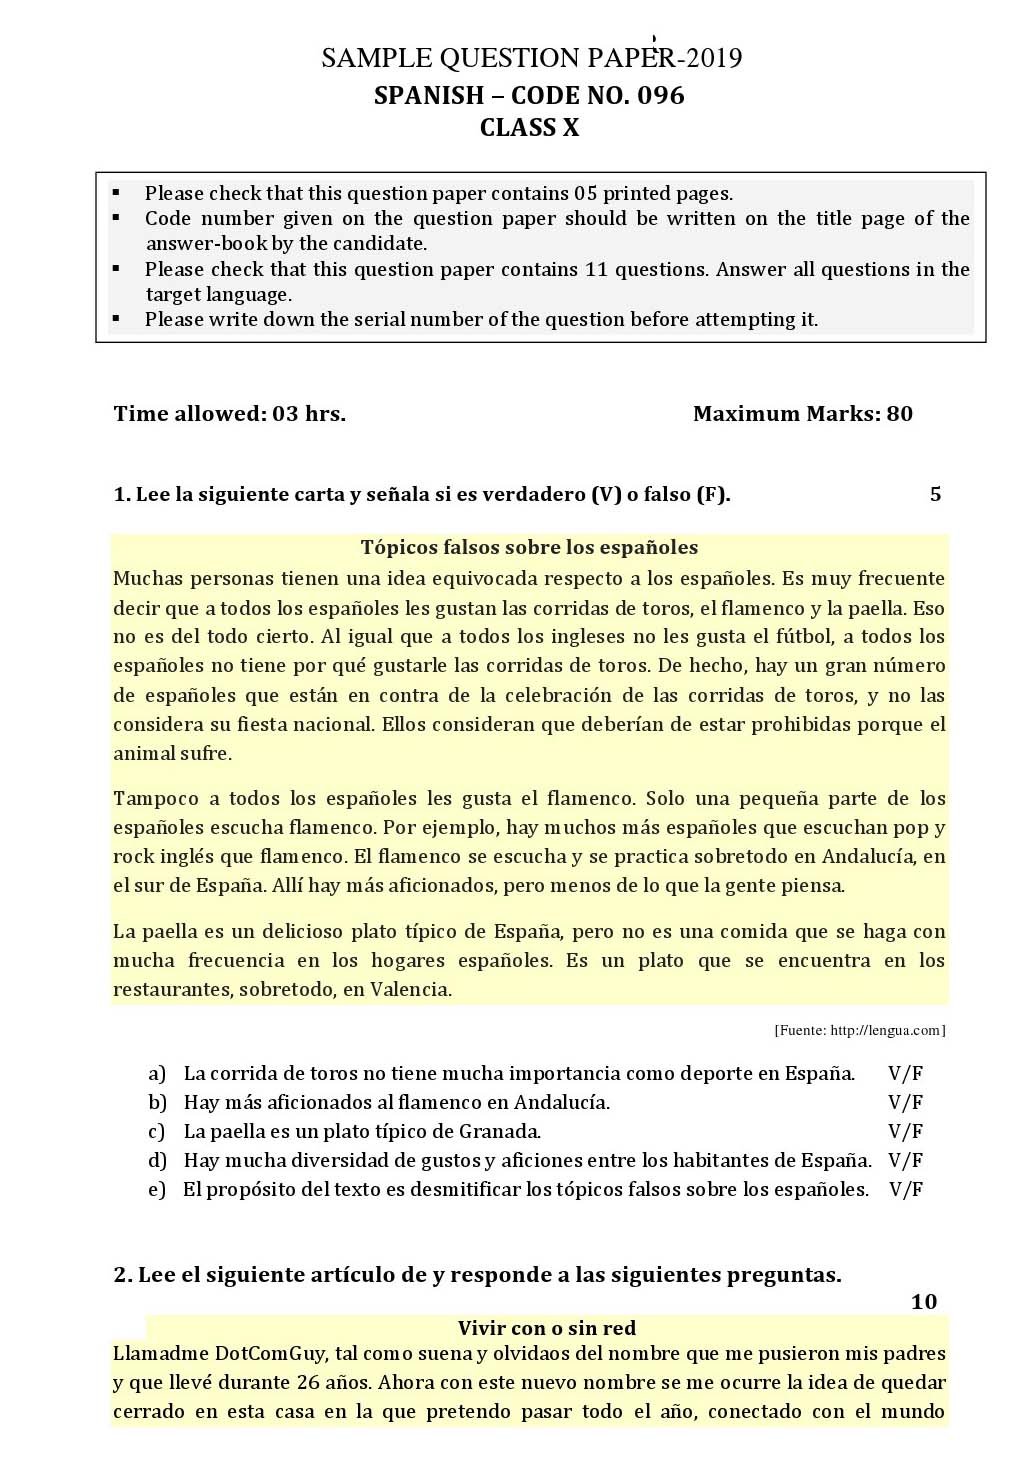 Spanish CBSE Class X Sample Question Paper 2018-19 - Image 1